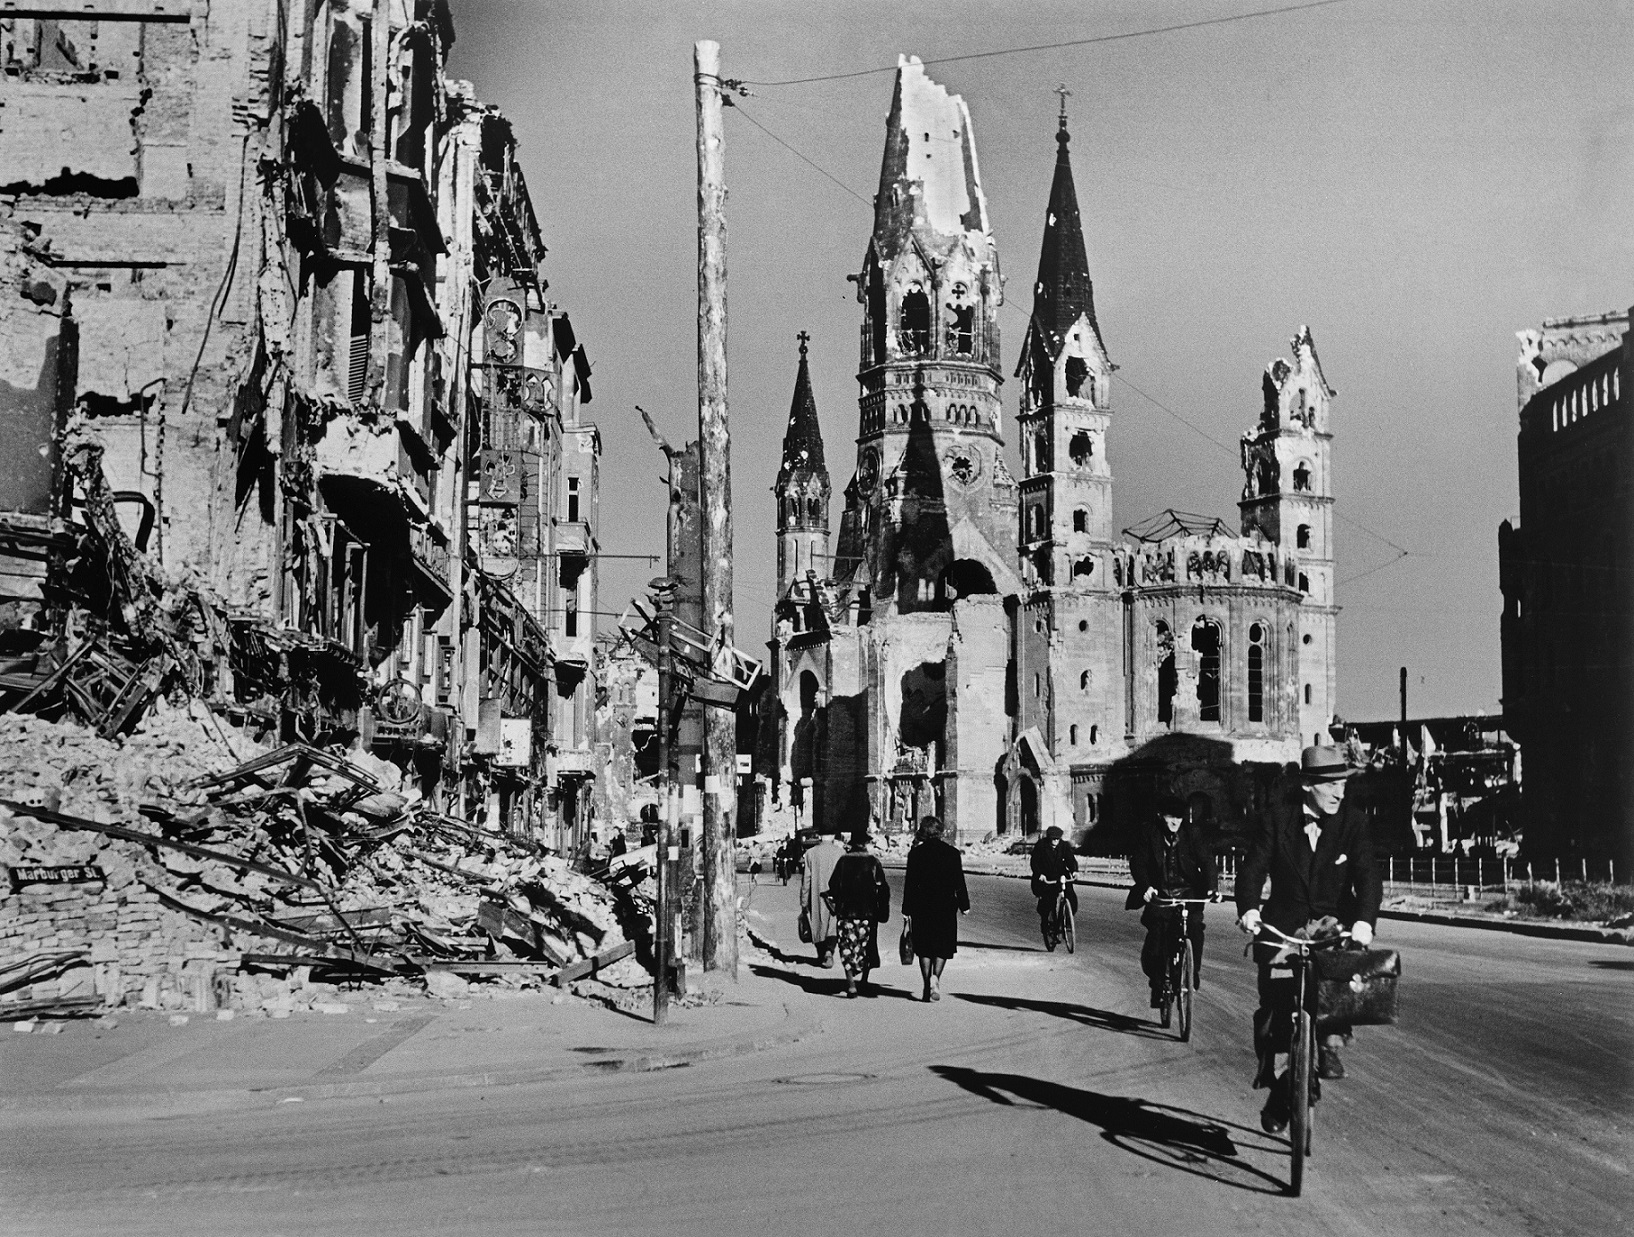 People on street lined with ruined buildings, Berlin, August 1945 © Robert Capa © International Center of Photography/Magnum Photos